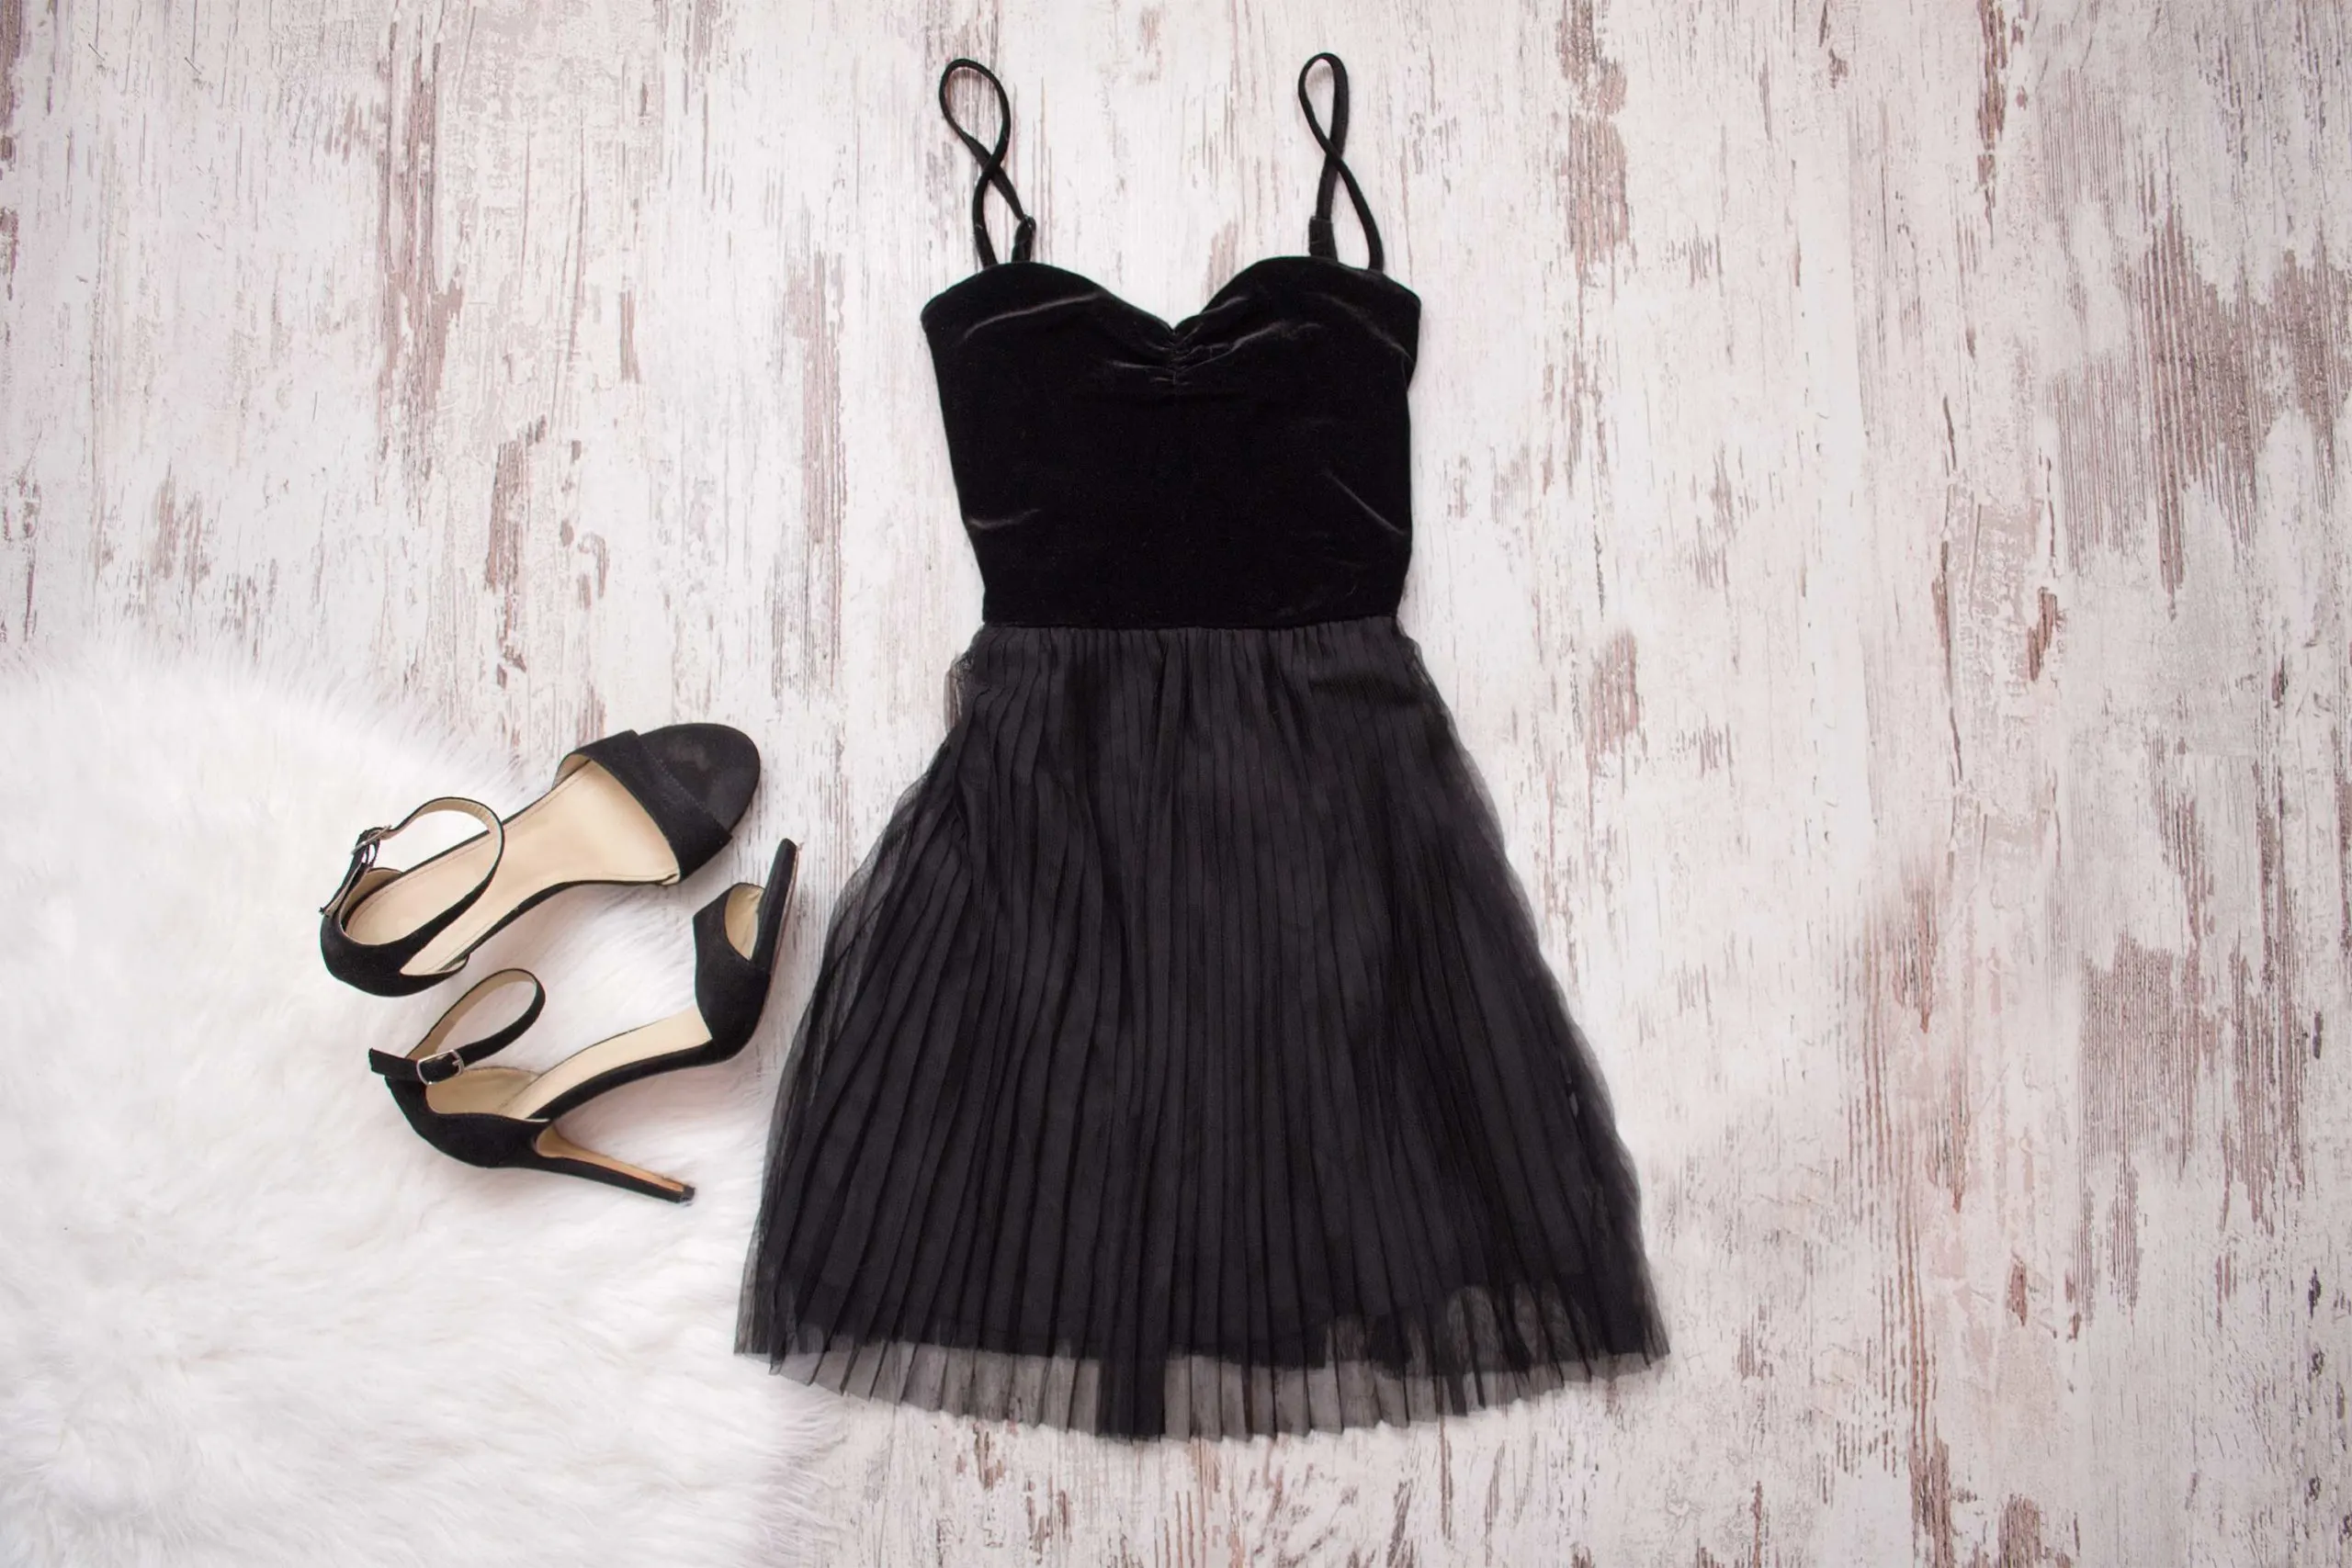 what accessories go with a black dress